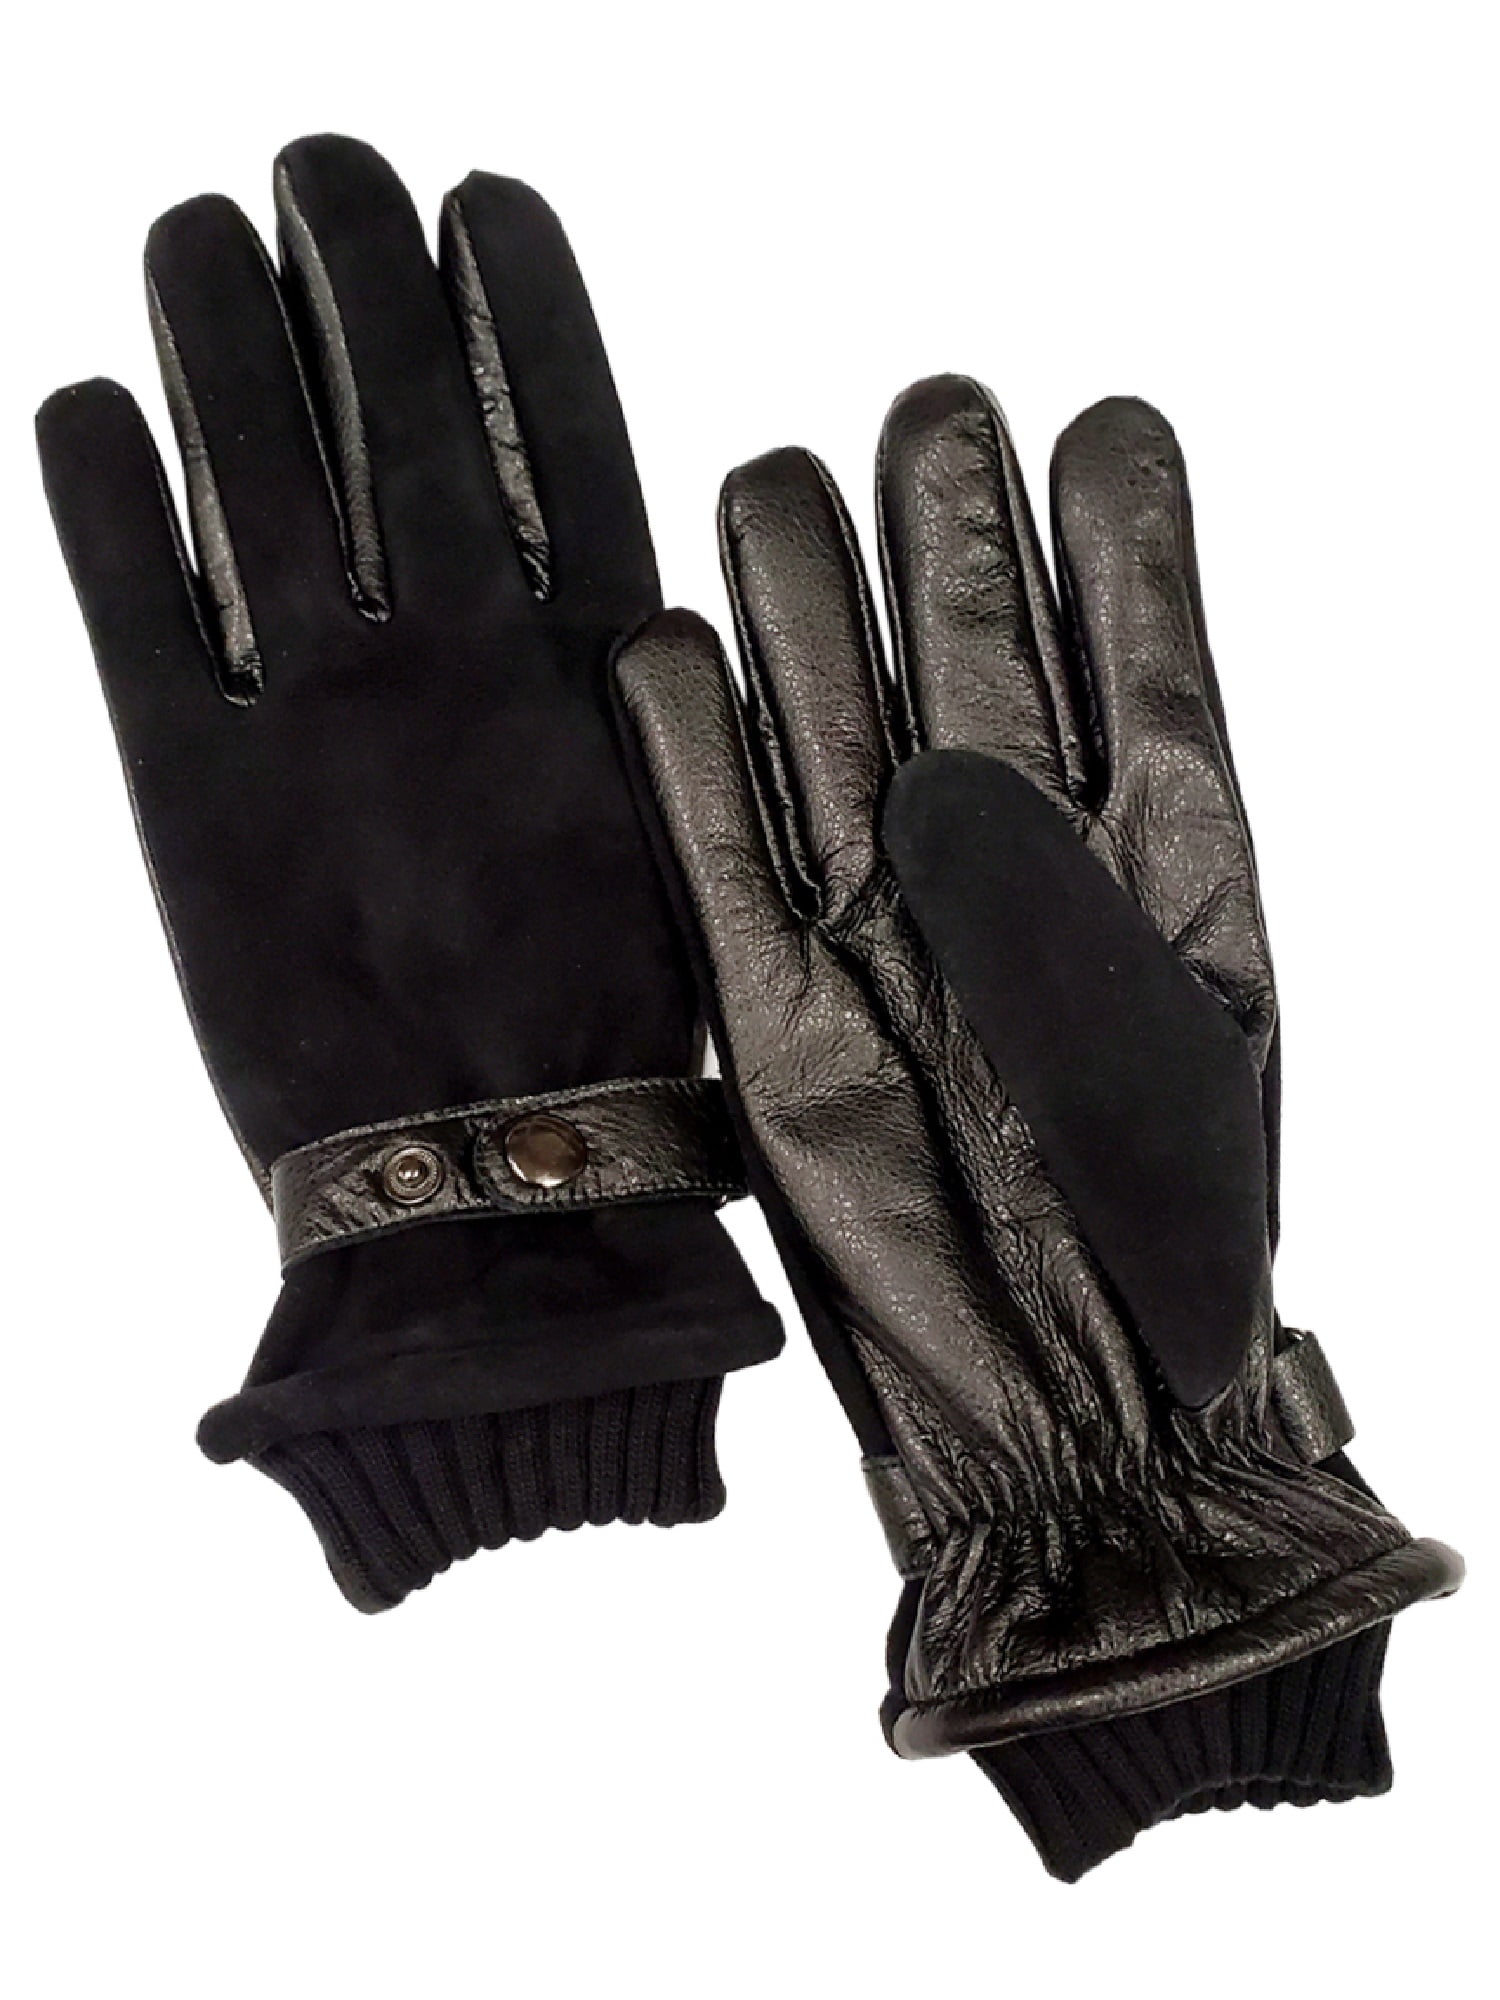 LD2320, Mens Premium Sheepskin Leather Glove, Soft Goat Suede Back, 100%  Polyester Fleece Lined with Knitwrist – Black (One Size Fits Most) 